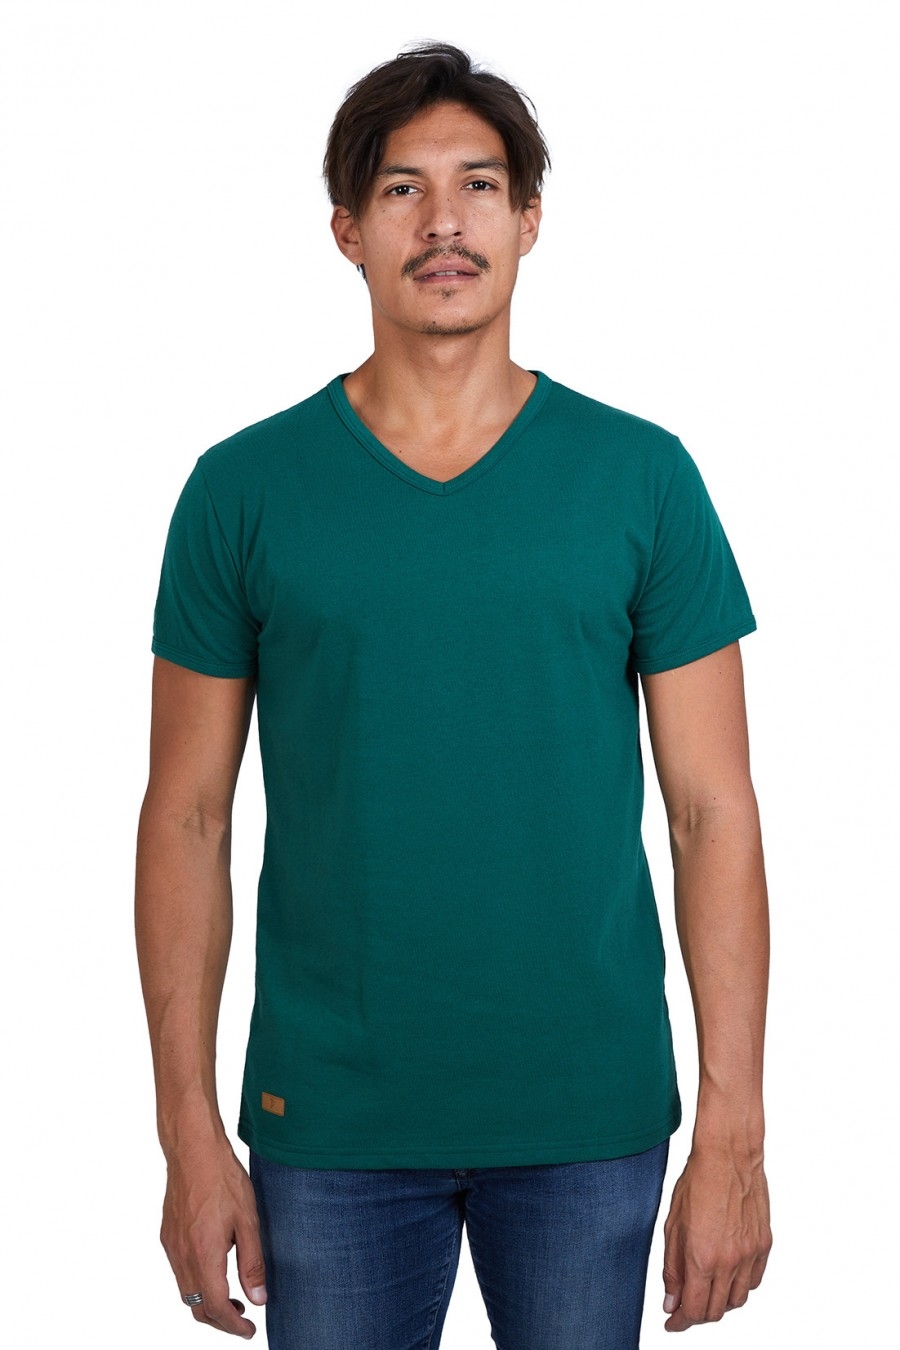 T-SHIRT HOMME MANCHE COURTE COL V VERT BOUTEILLE - Made in France & 100% Recyclé